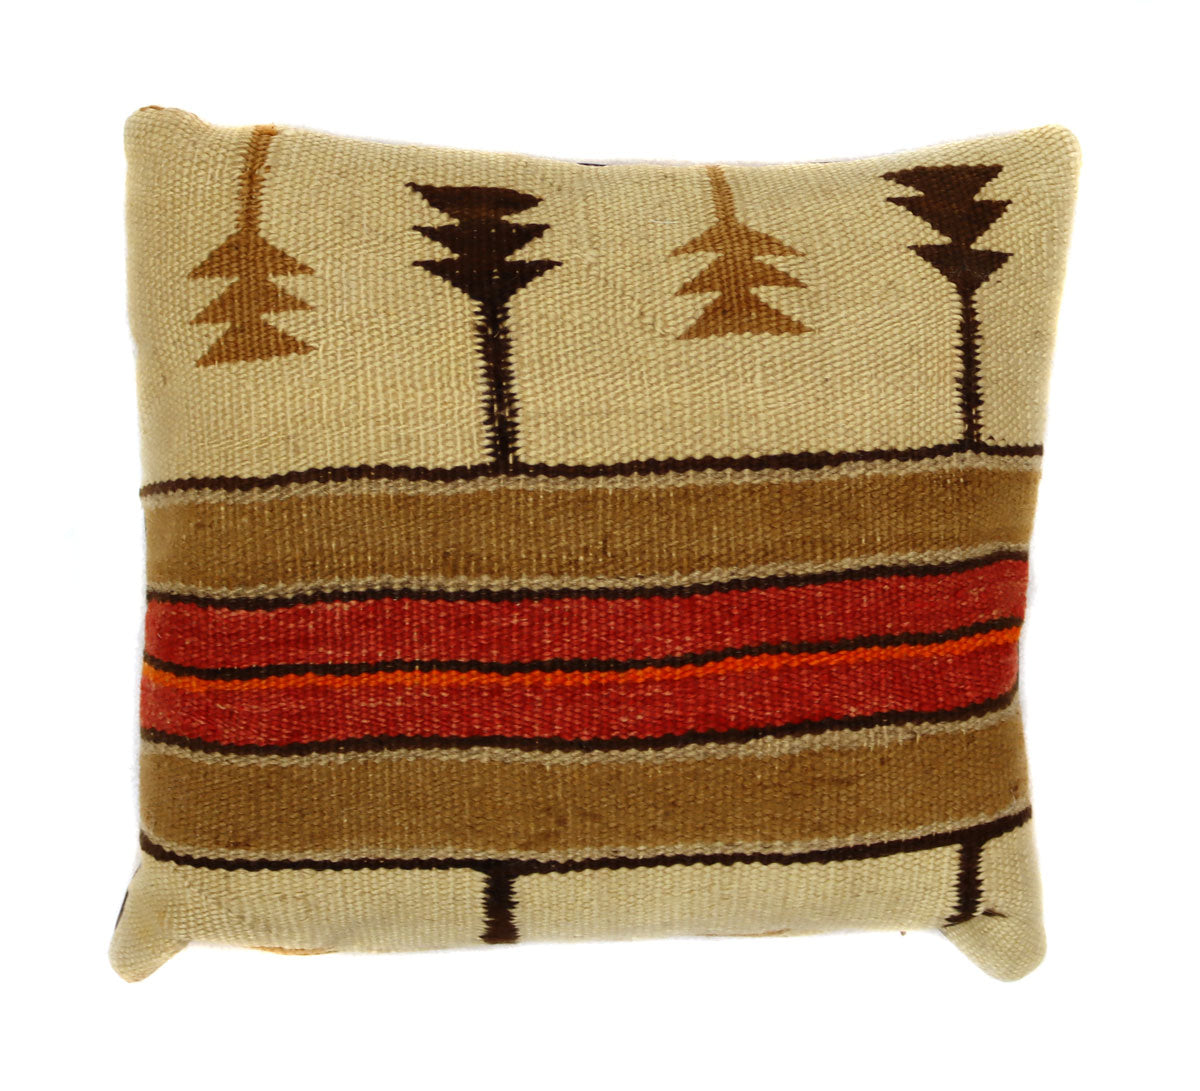 Custom Leather Pillow with c. 1930s Navajo Crystal Textile Inlay, 13" x 16" x 5" (F1450-004)
